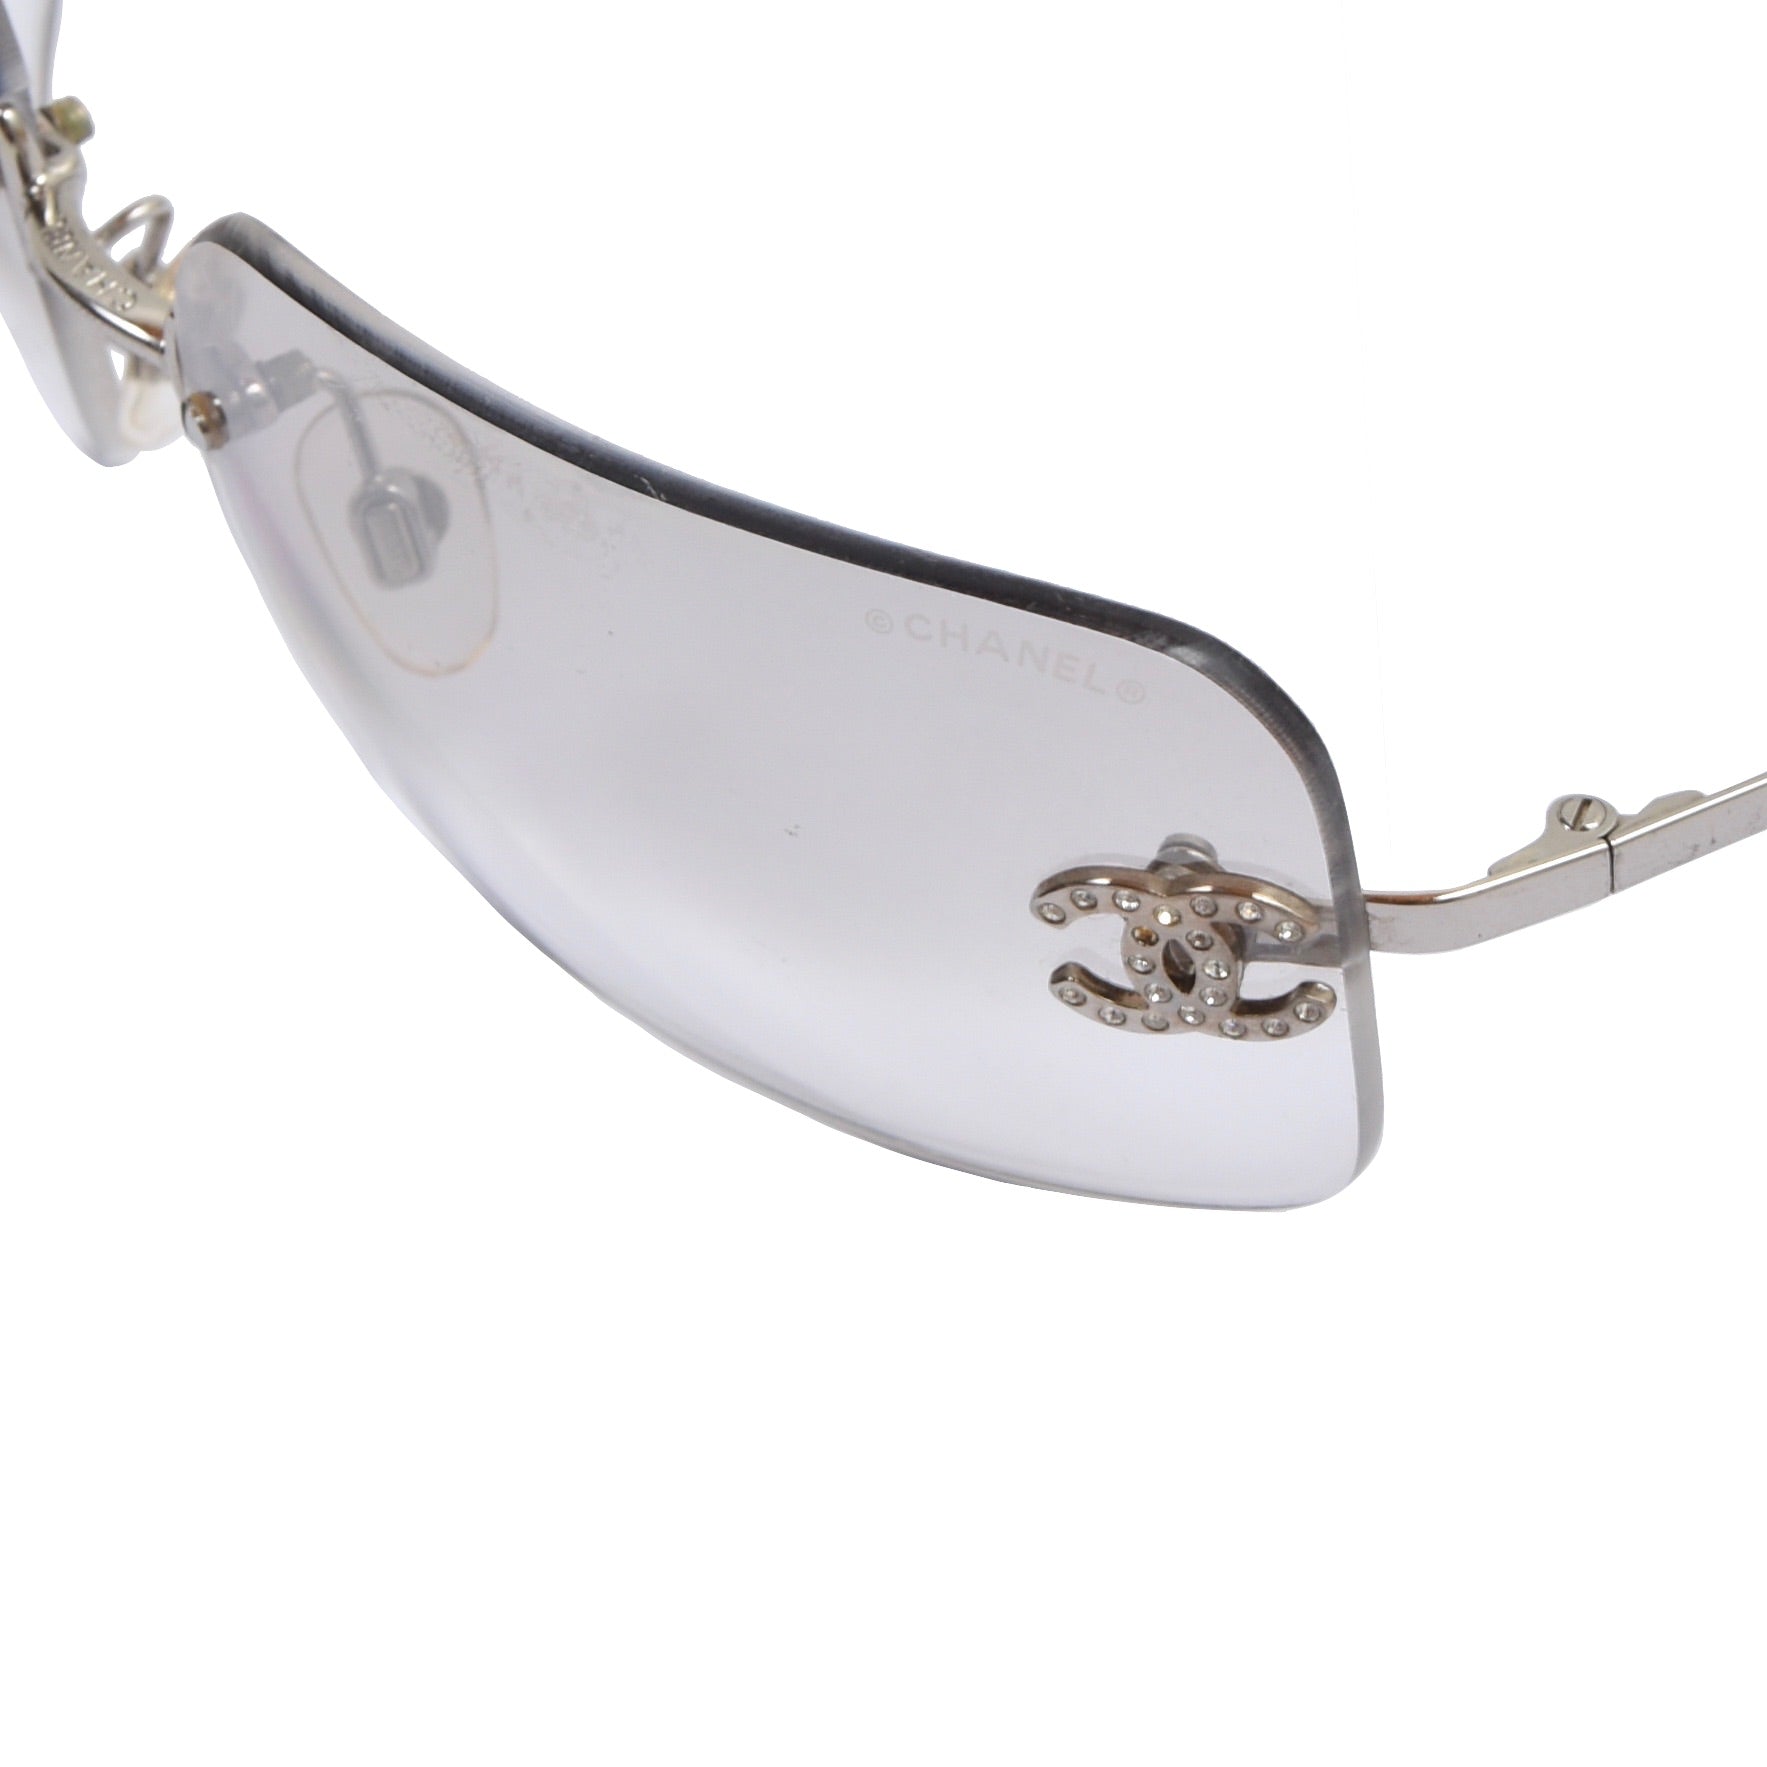 CHANEL, Accessories, Like New Vintage Chanel Rimless Gold 44b Sunglasses